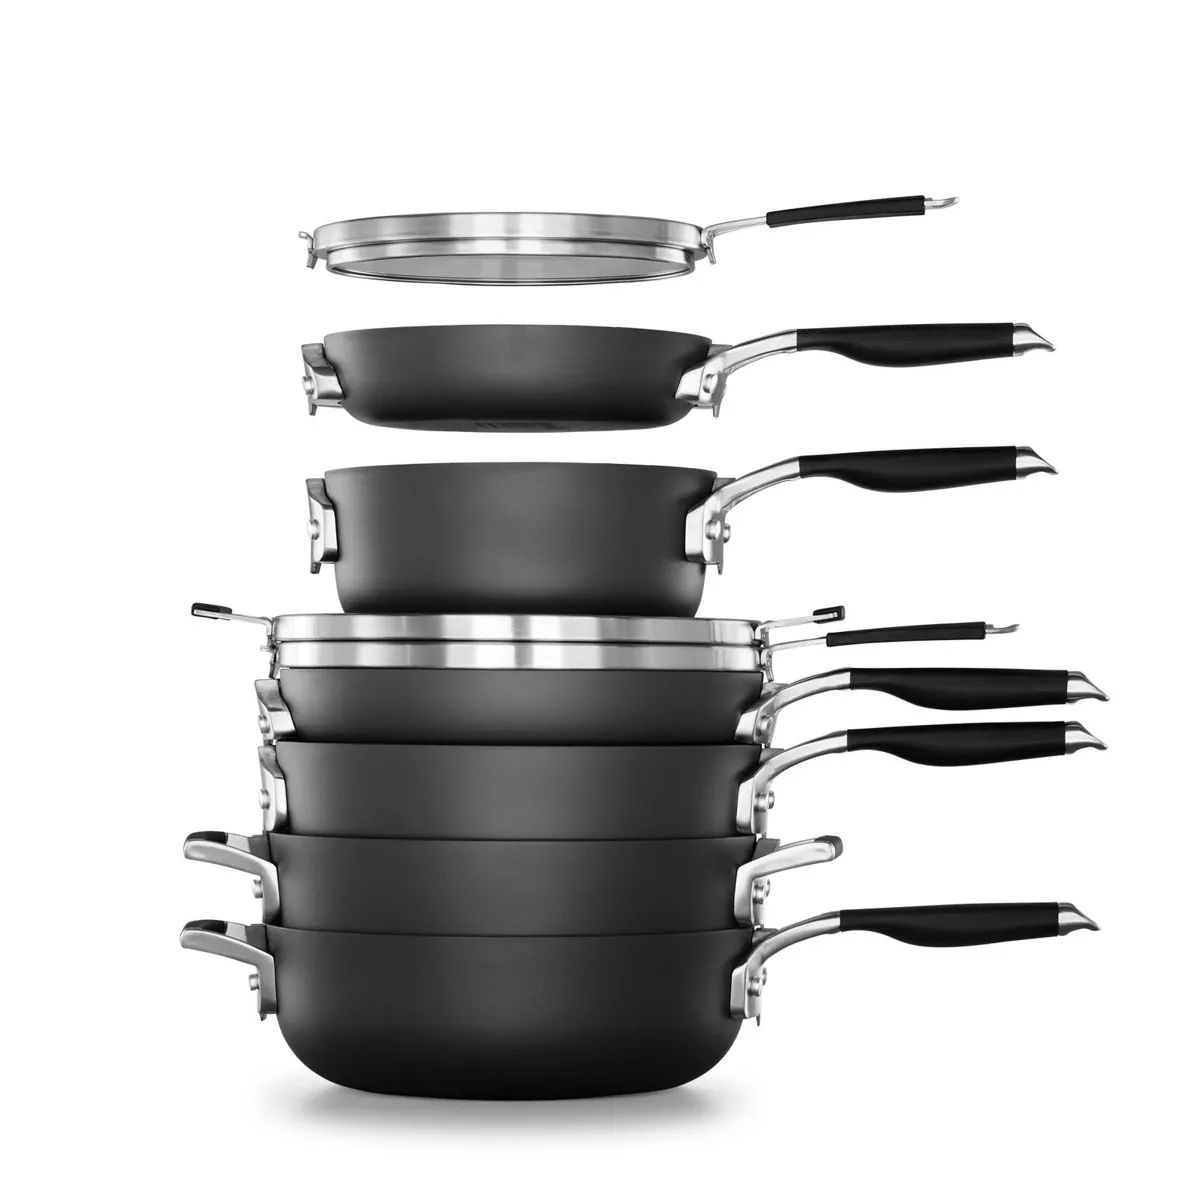 Select by Calphalon with AquaShield Nonstick 9pc Space-Saving Cookware Set | Target